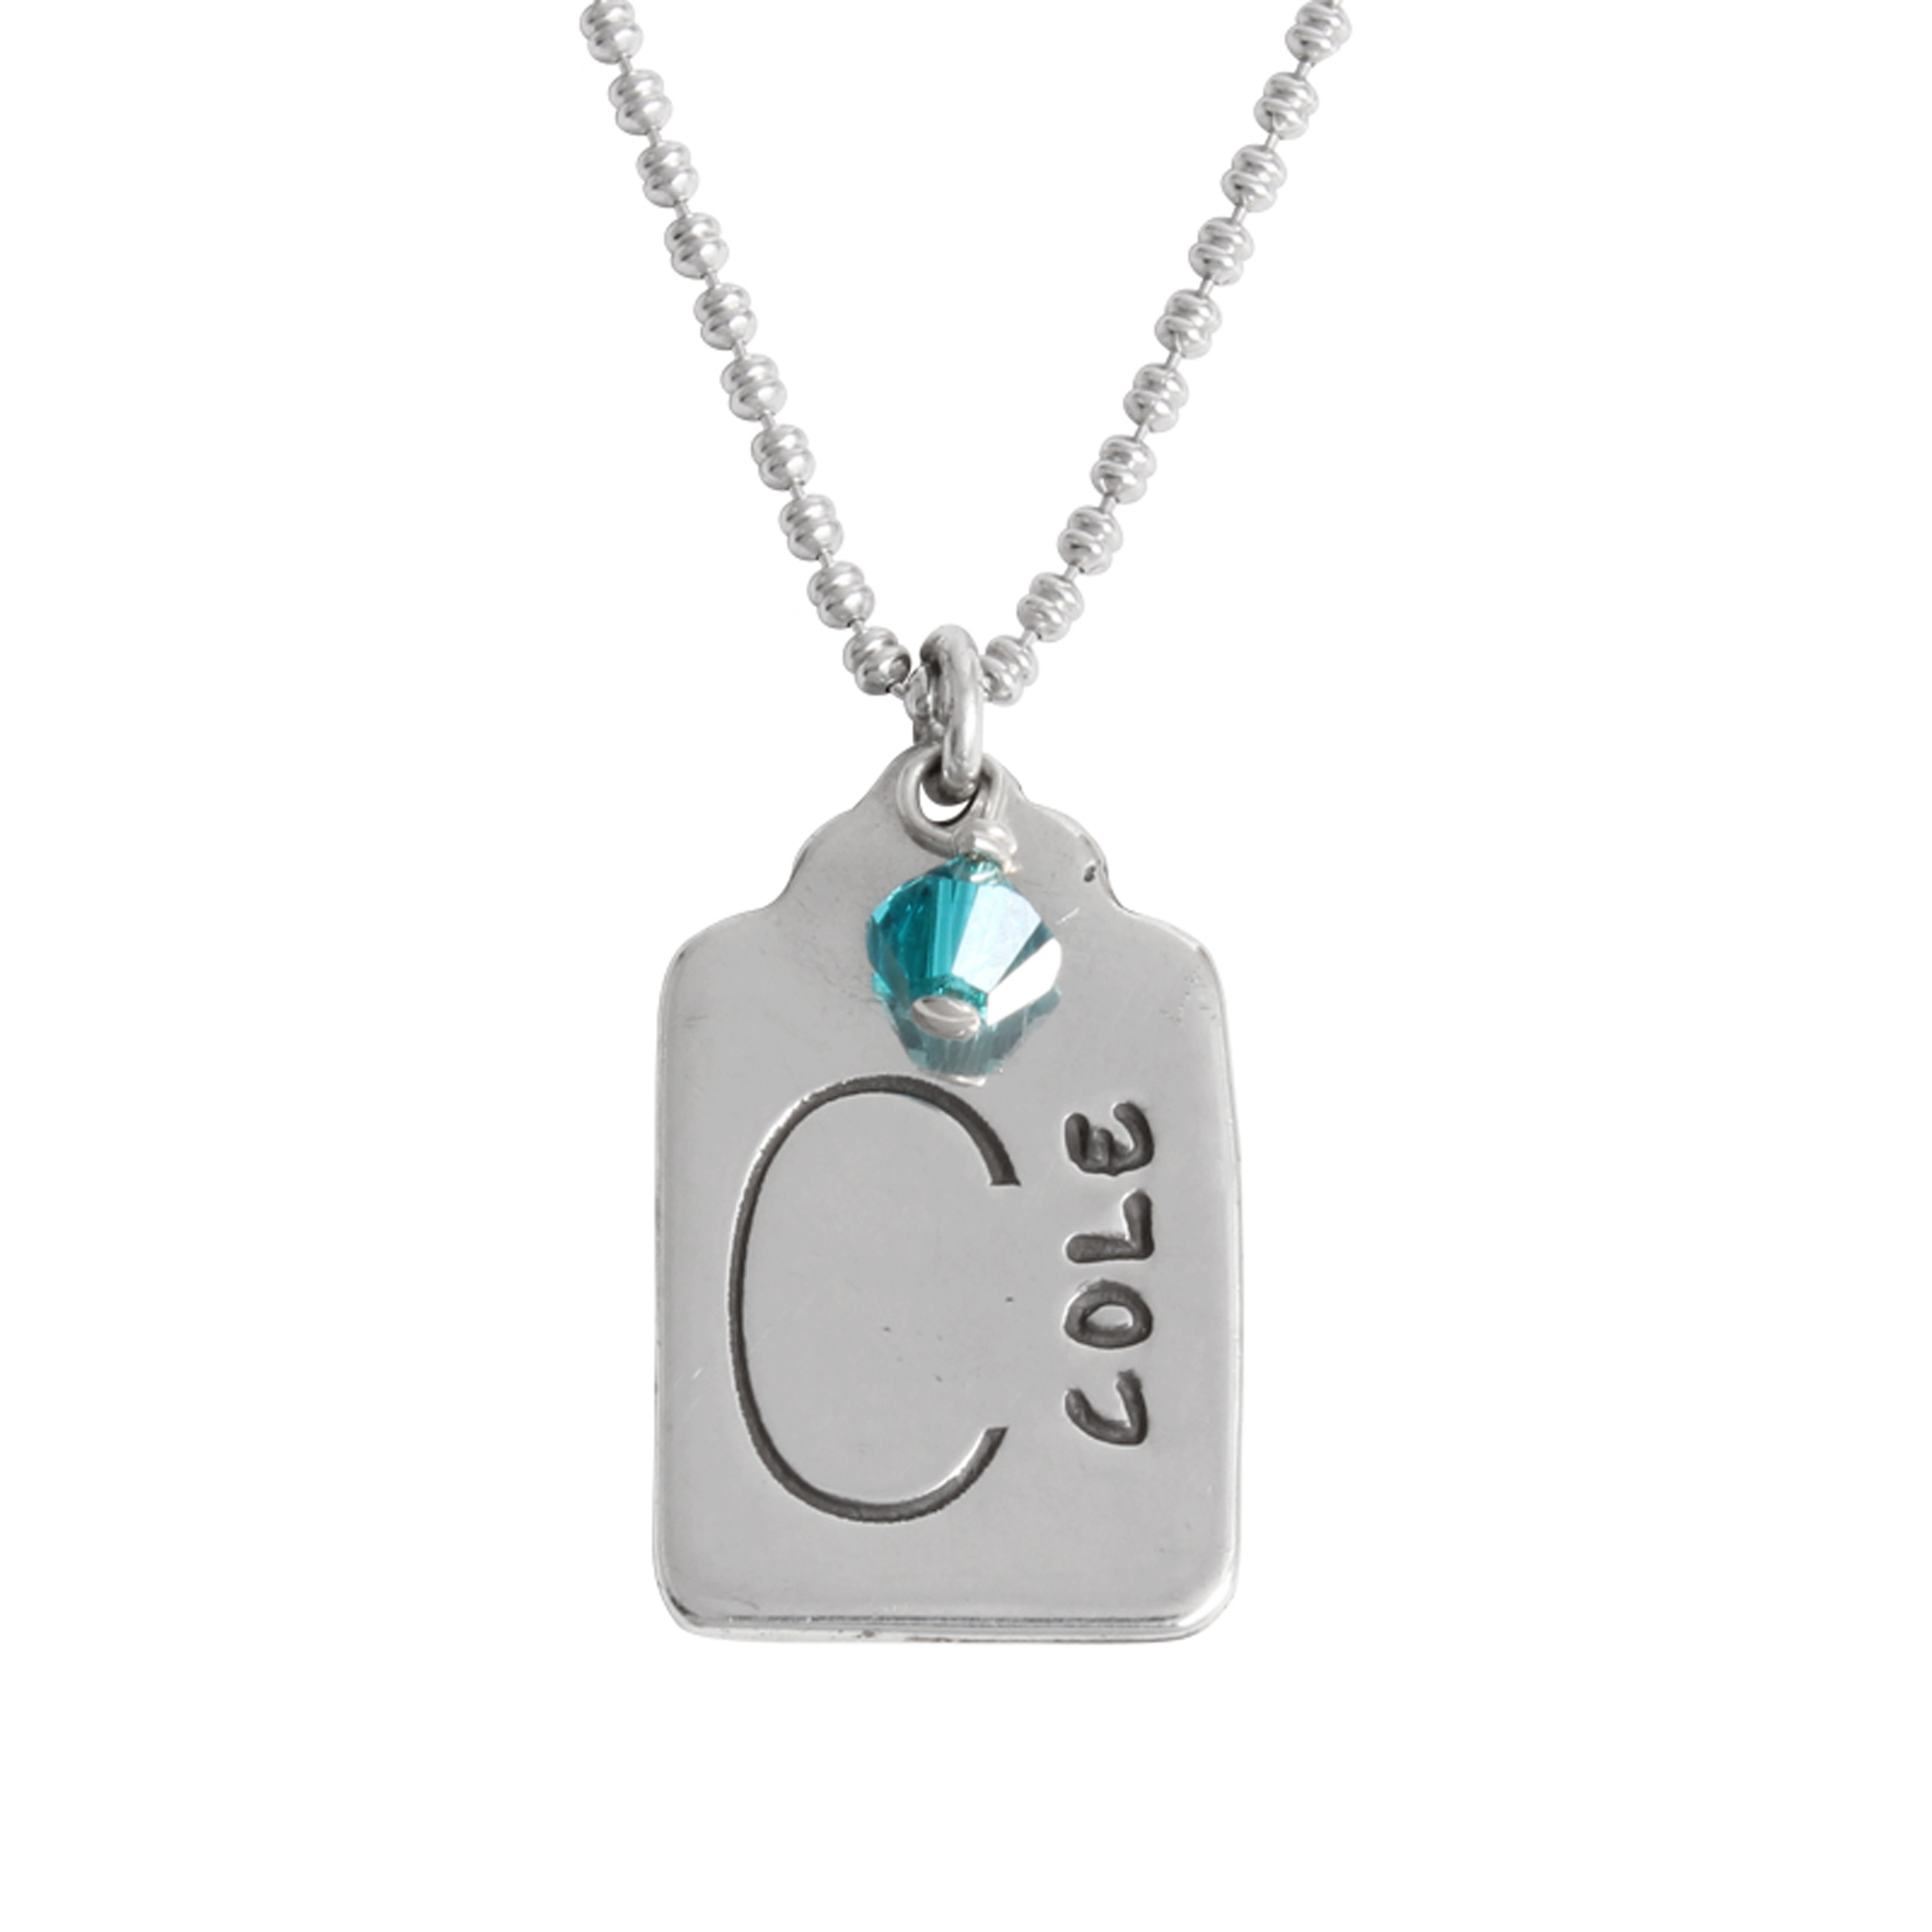 Personalized mother's charm necklace